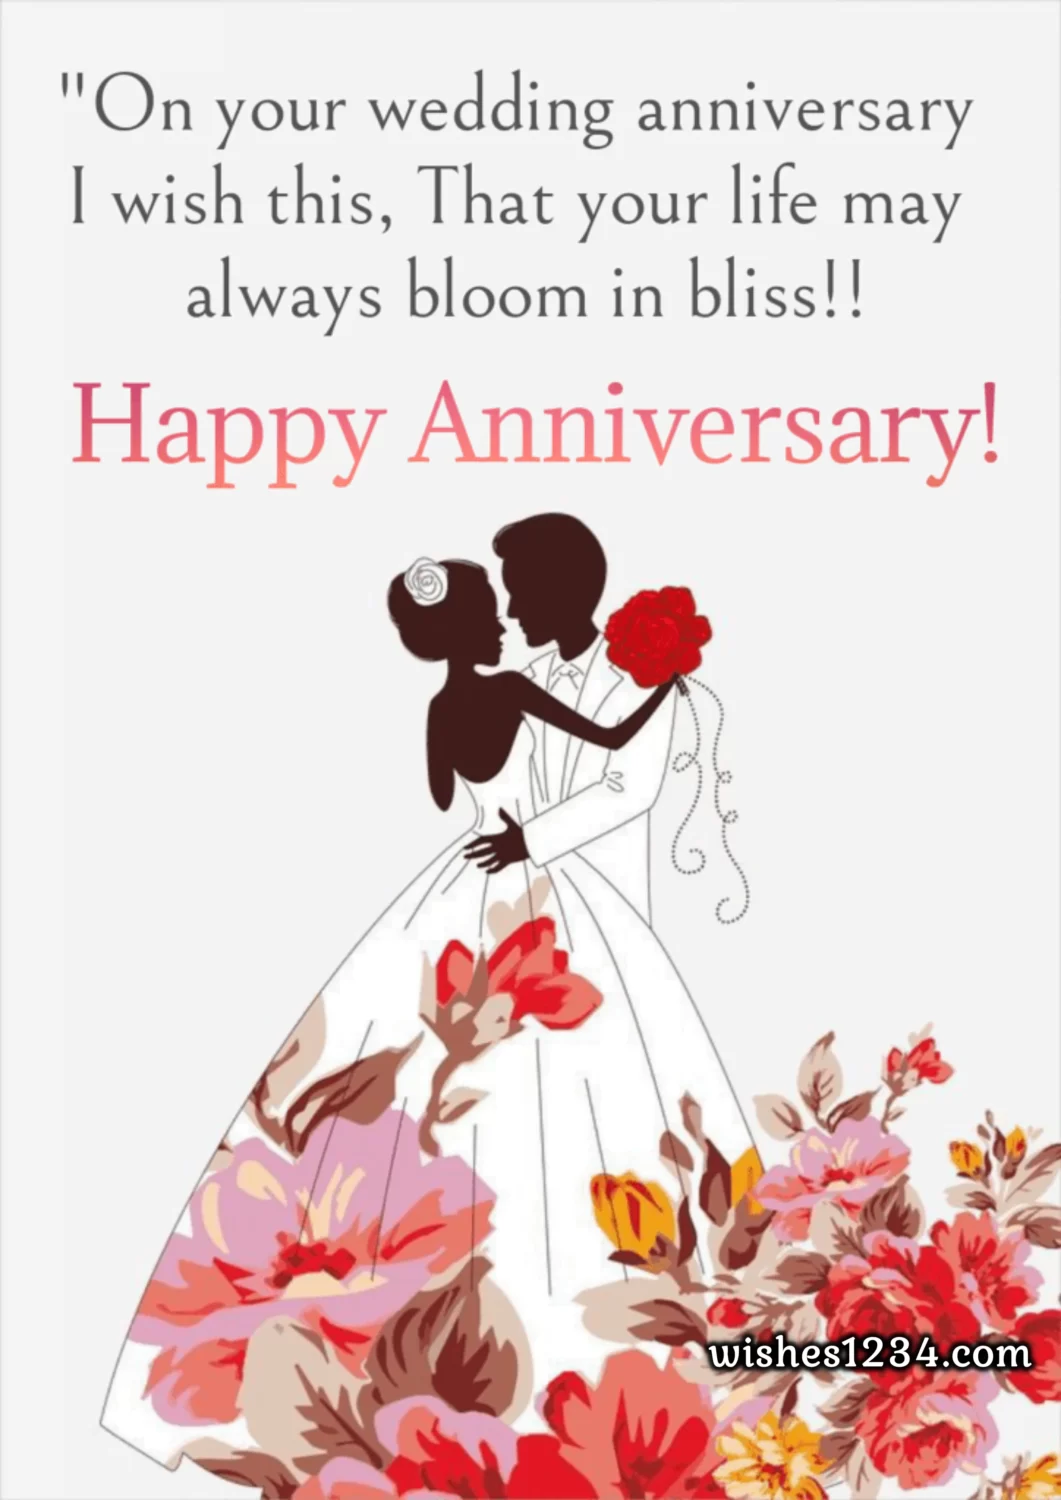 Bride and groom images in dancing pose, Wedding anniversary quotes, Happy Anniversary Messages.